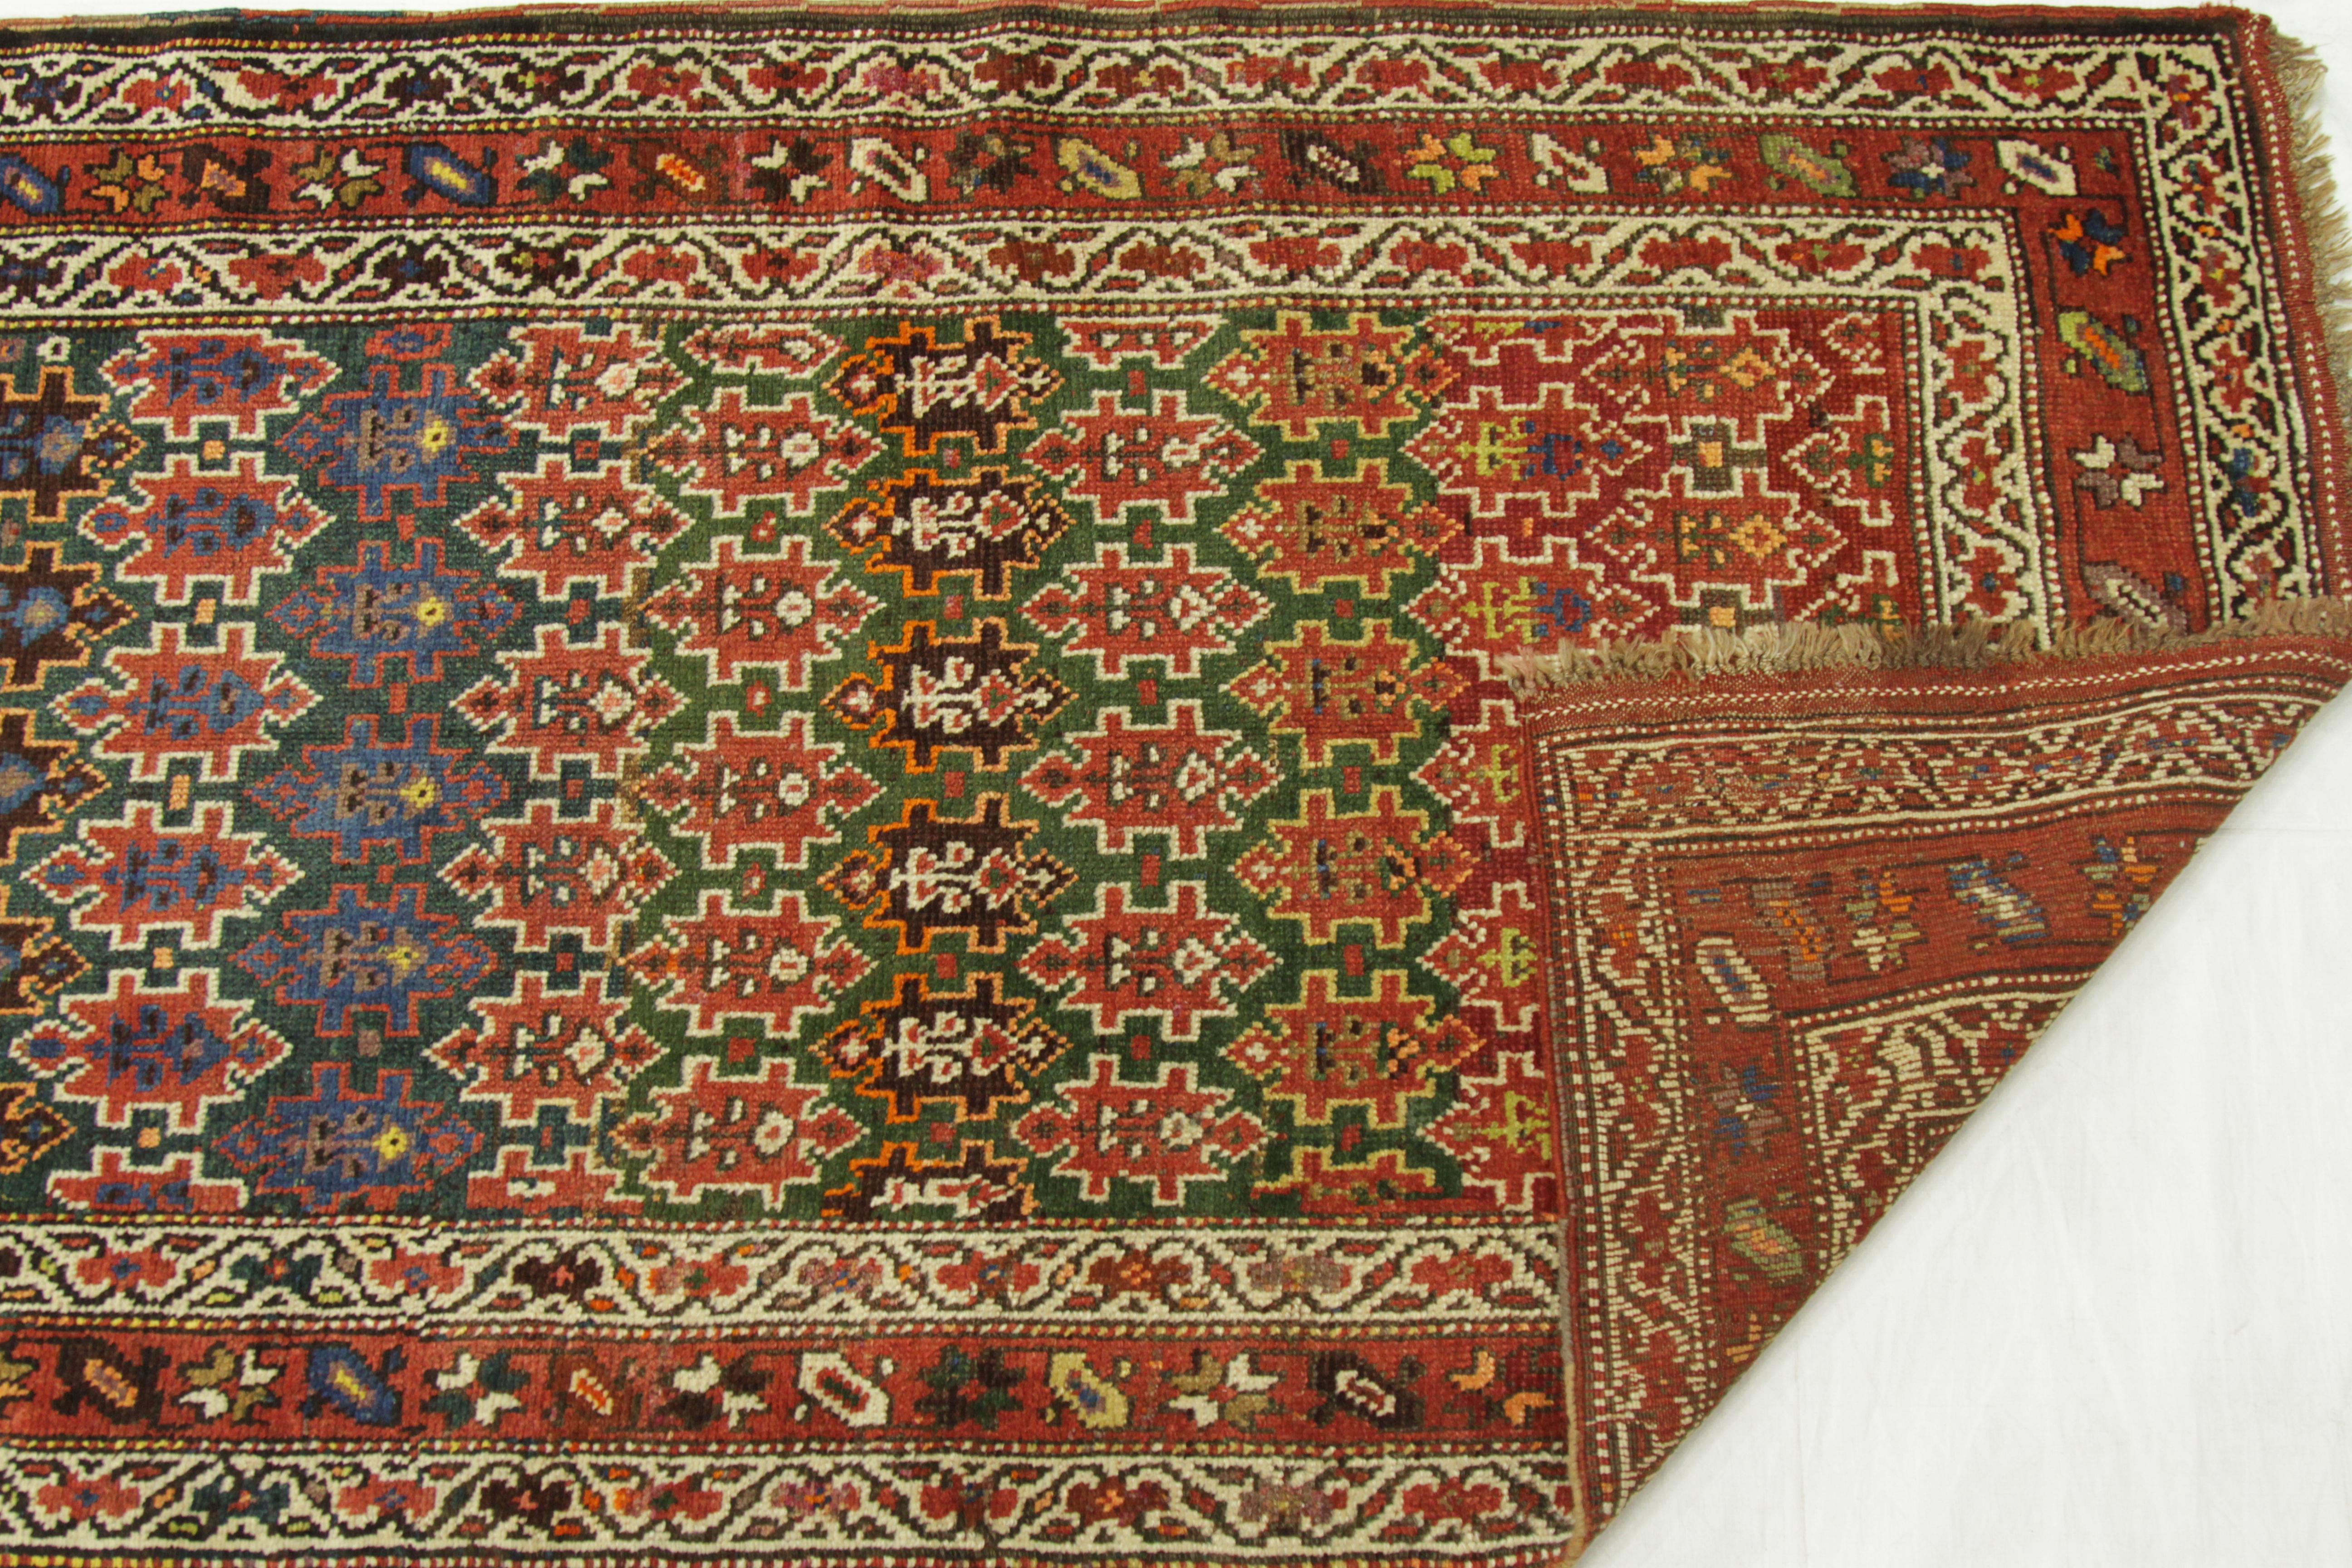 Antique Persian Rug Azerbaijan Design with Vibrant Tribal Patterns, circa 1920s In Excellent Condition For Sale In Dallas, TX